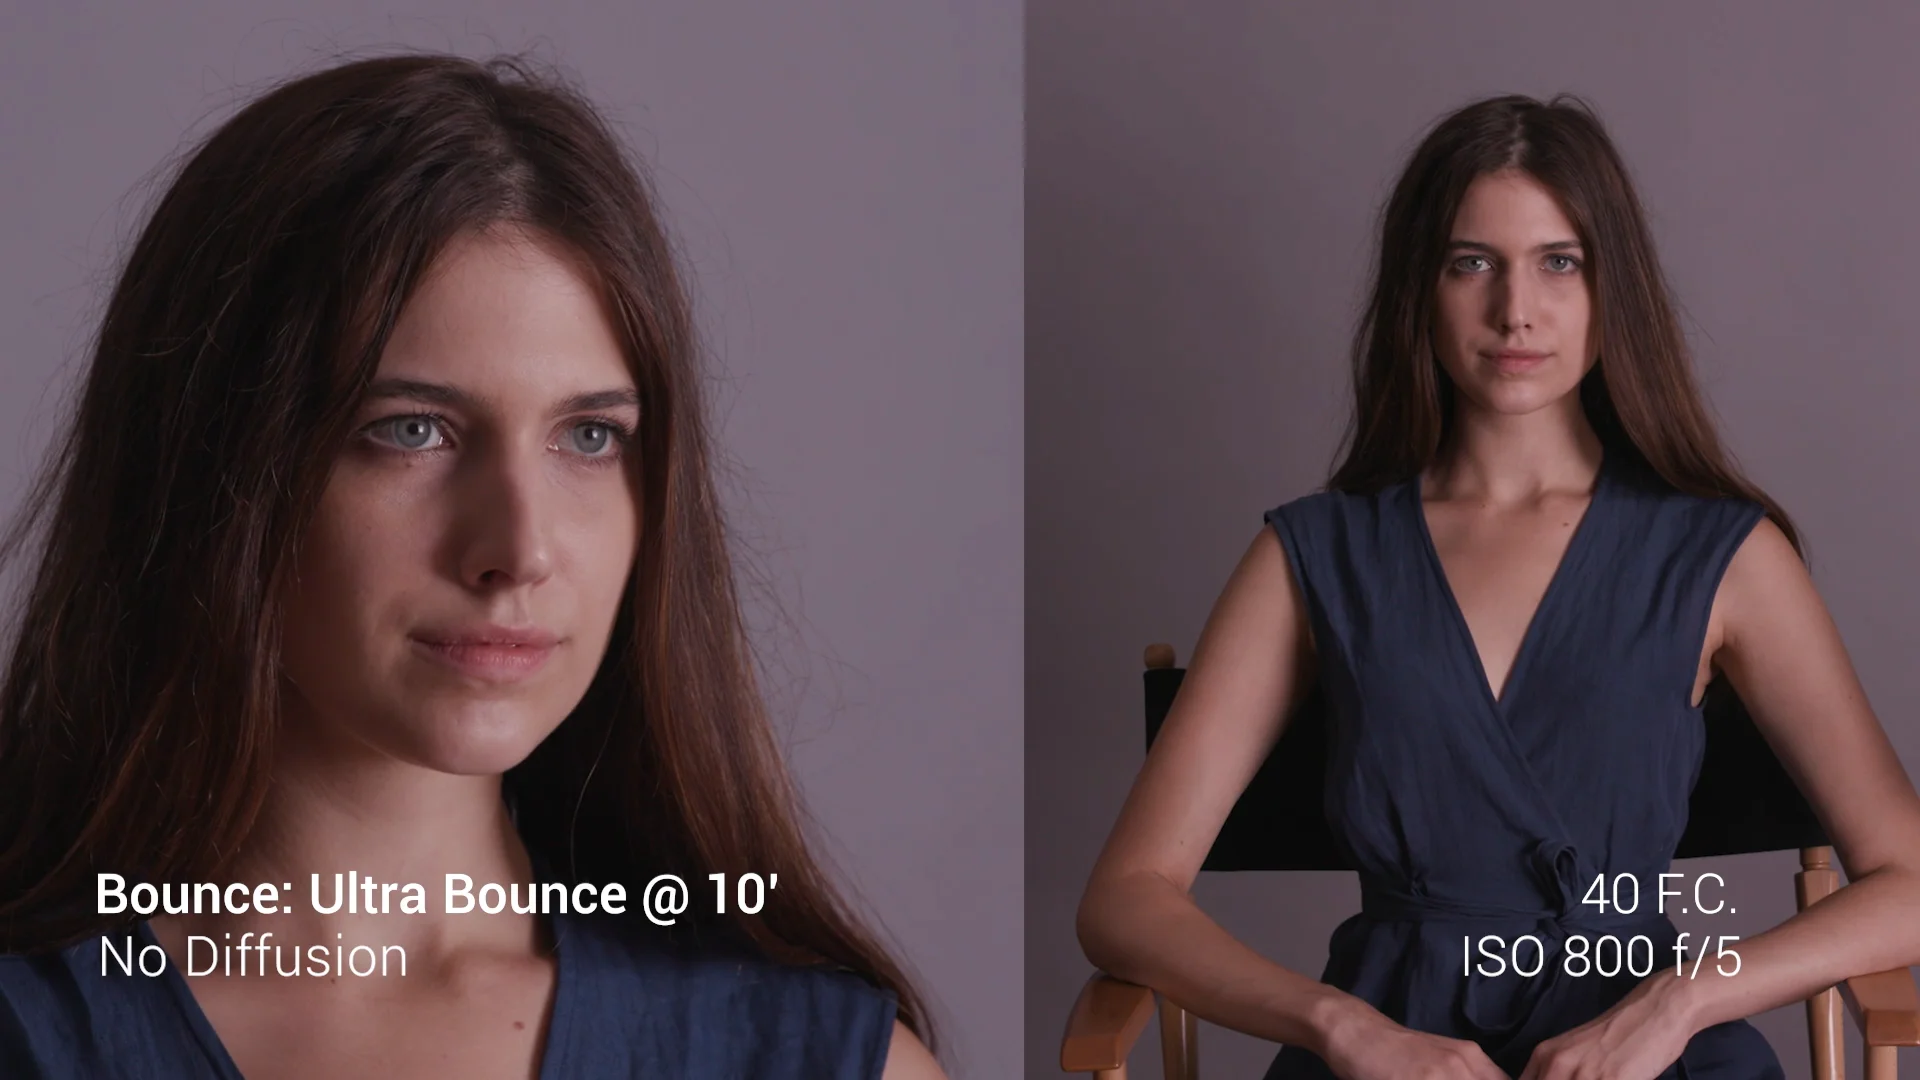 Ultimate Diffusion & Bounce Test-Ultra Bounce on Vimeo